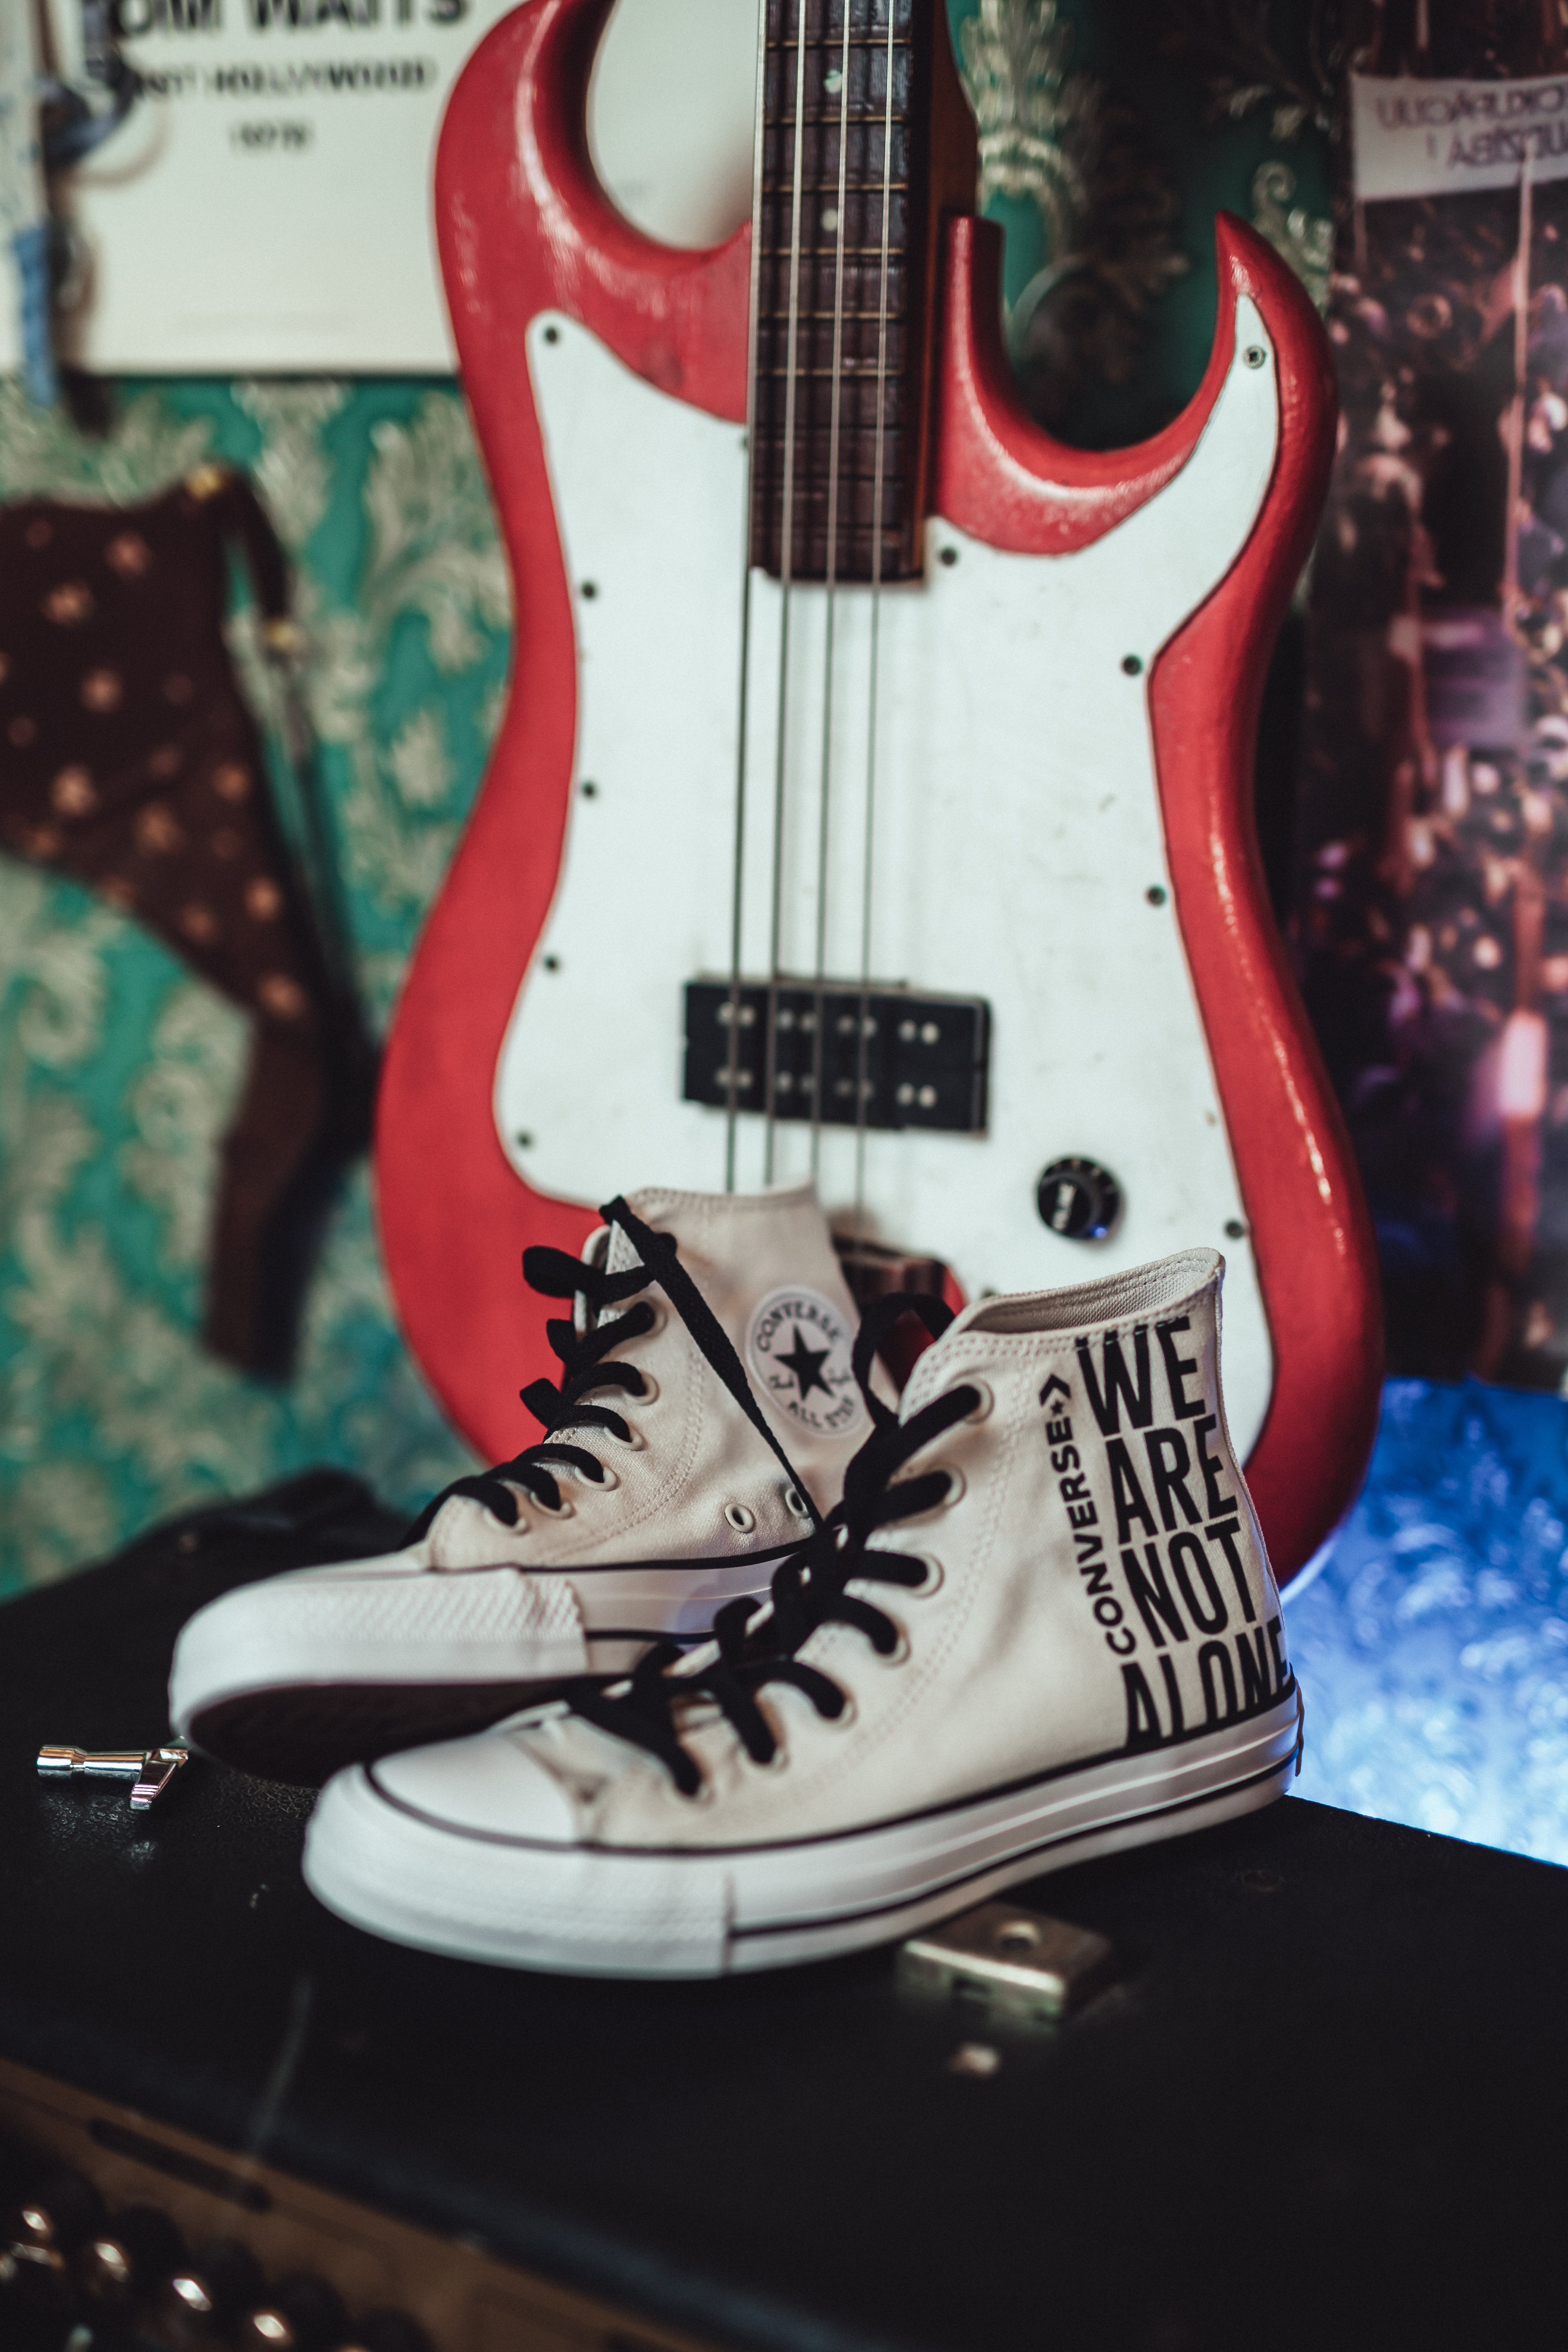 shoes, miscellanea, miscellaneous, sneakers, guitar, style, footwear wallpaper for mobile